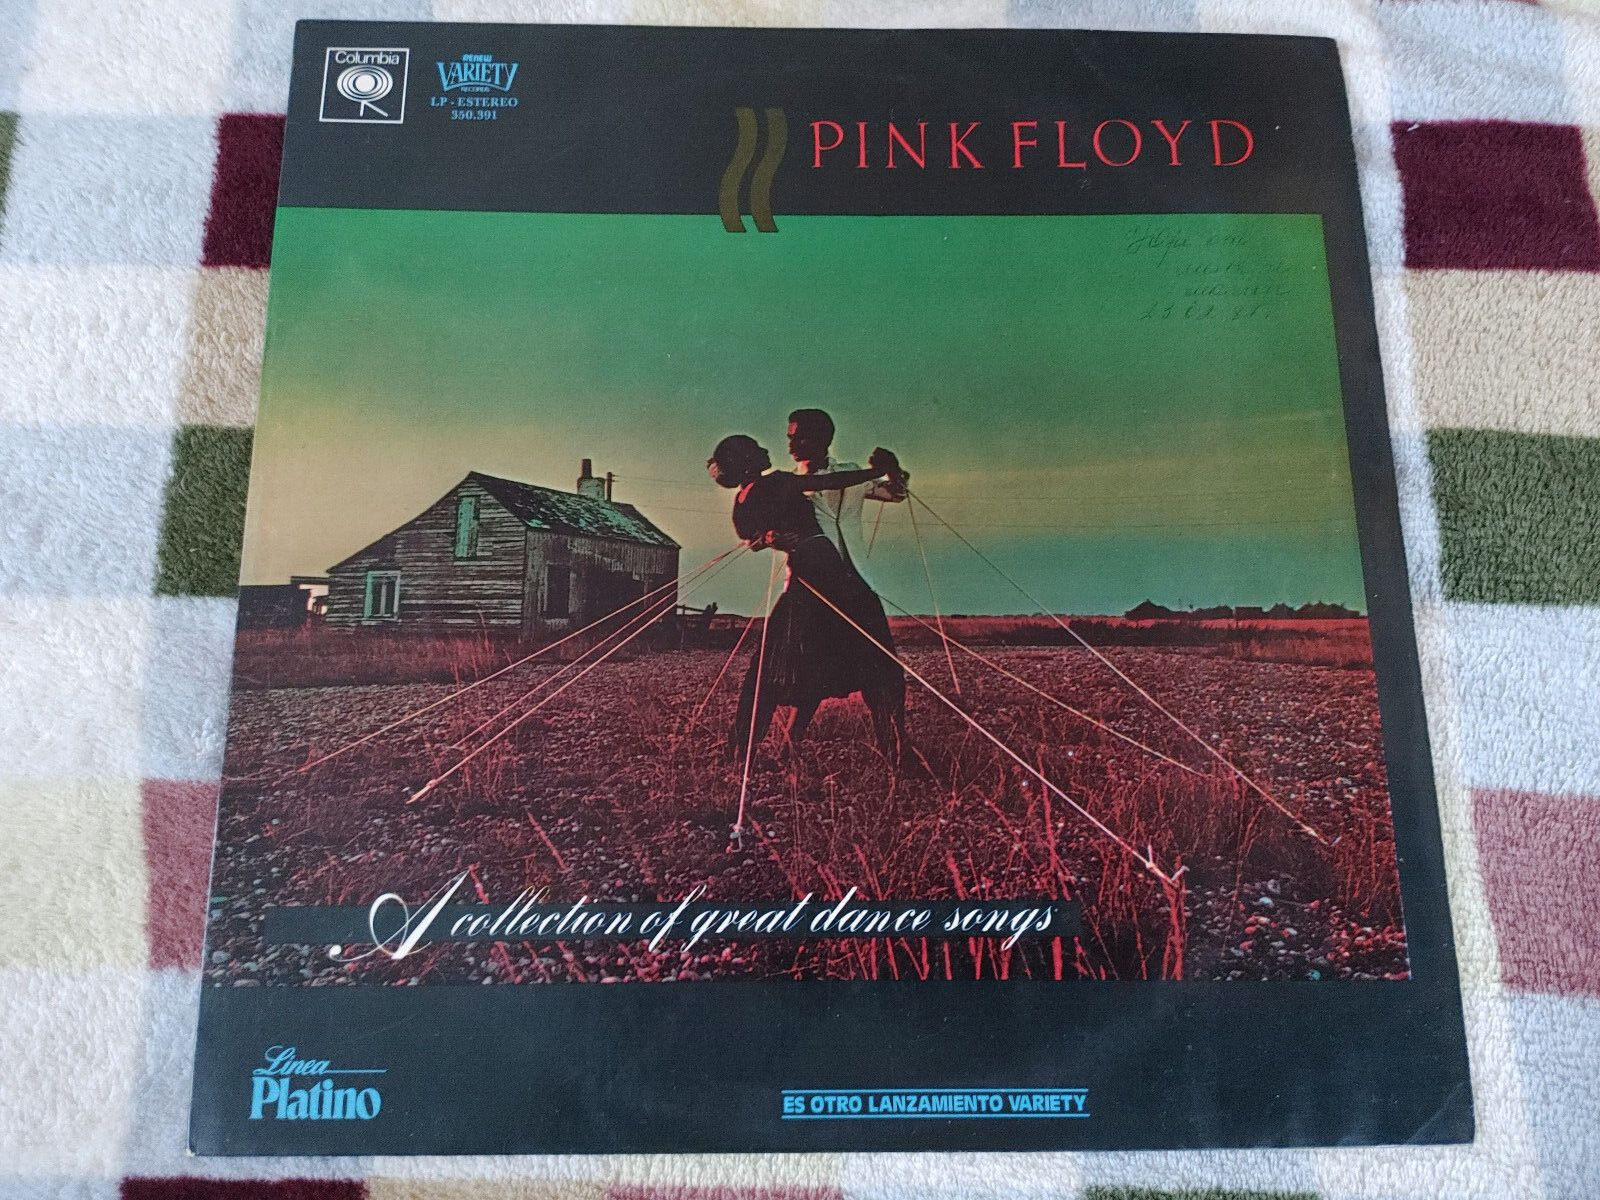 PINK FLOYD - A COLLECTION OF GREAT DANCE SONGS - HARD TO FIND - URUGUAY